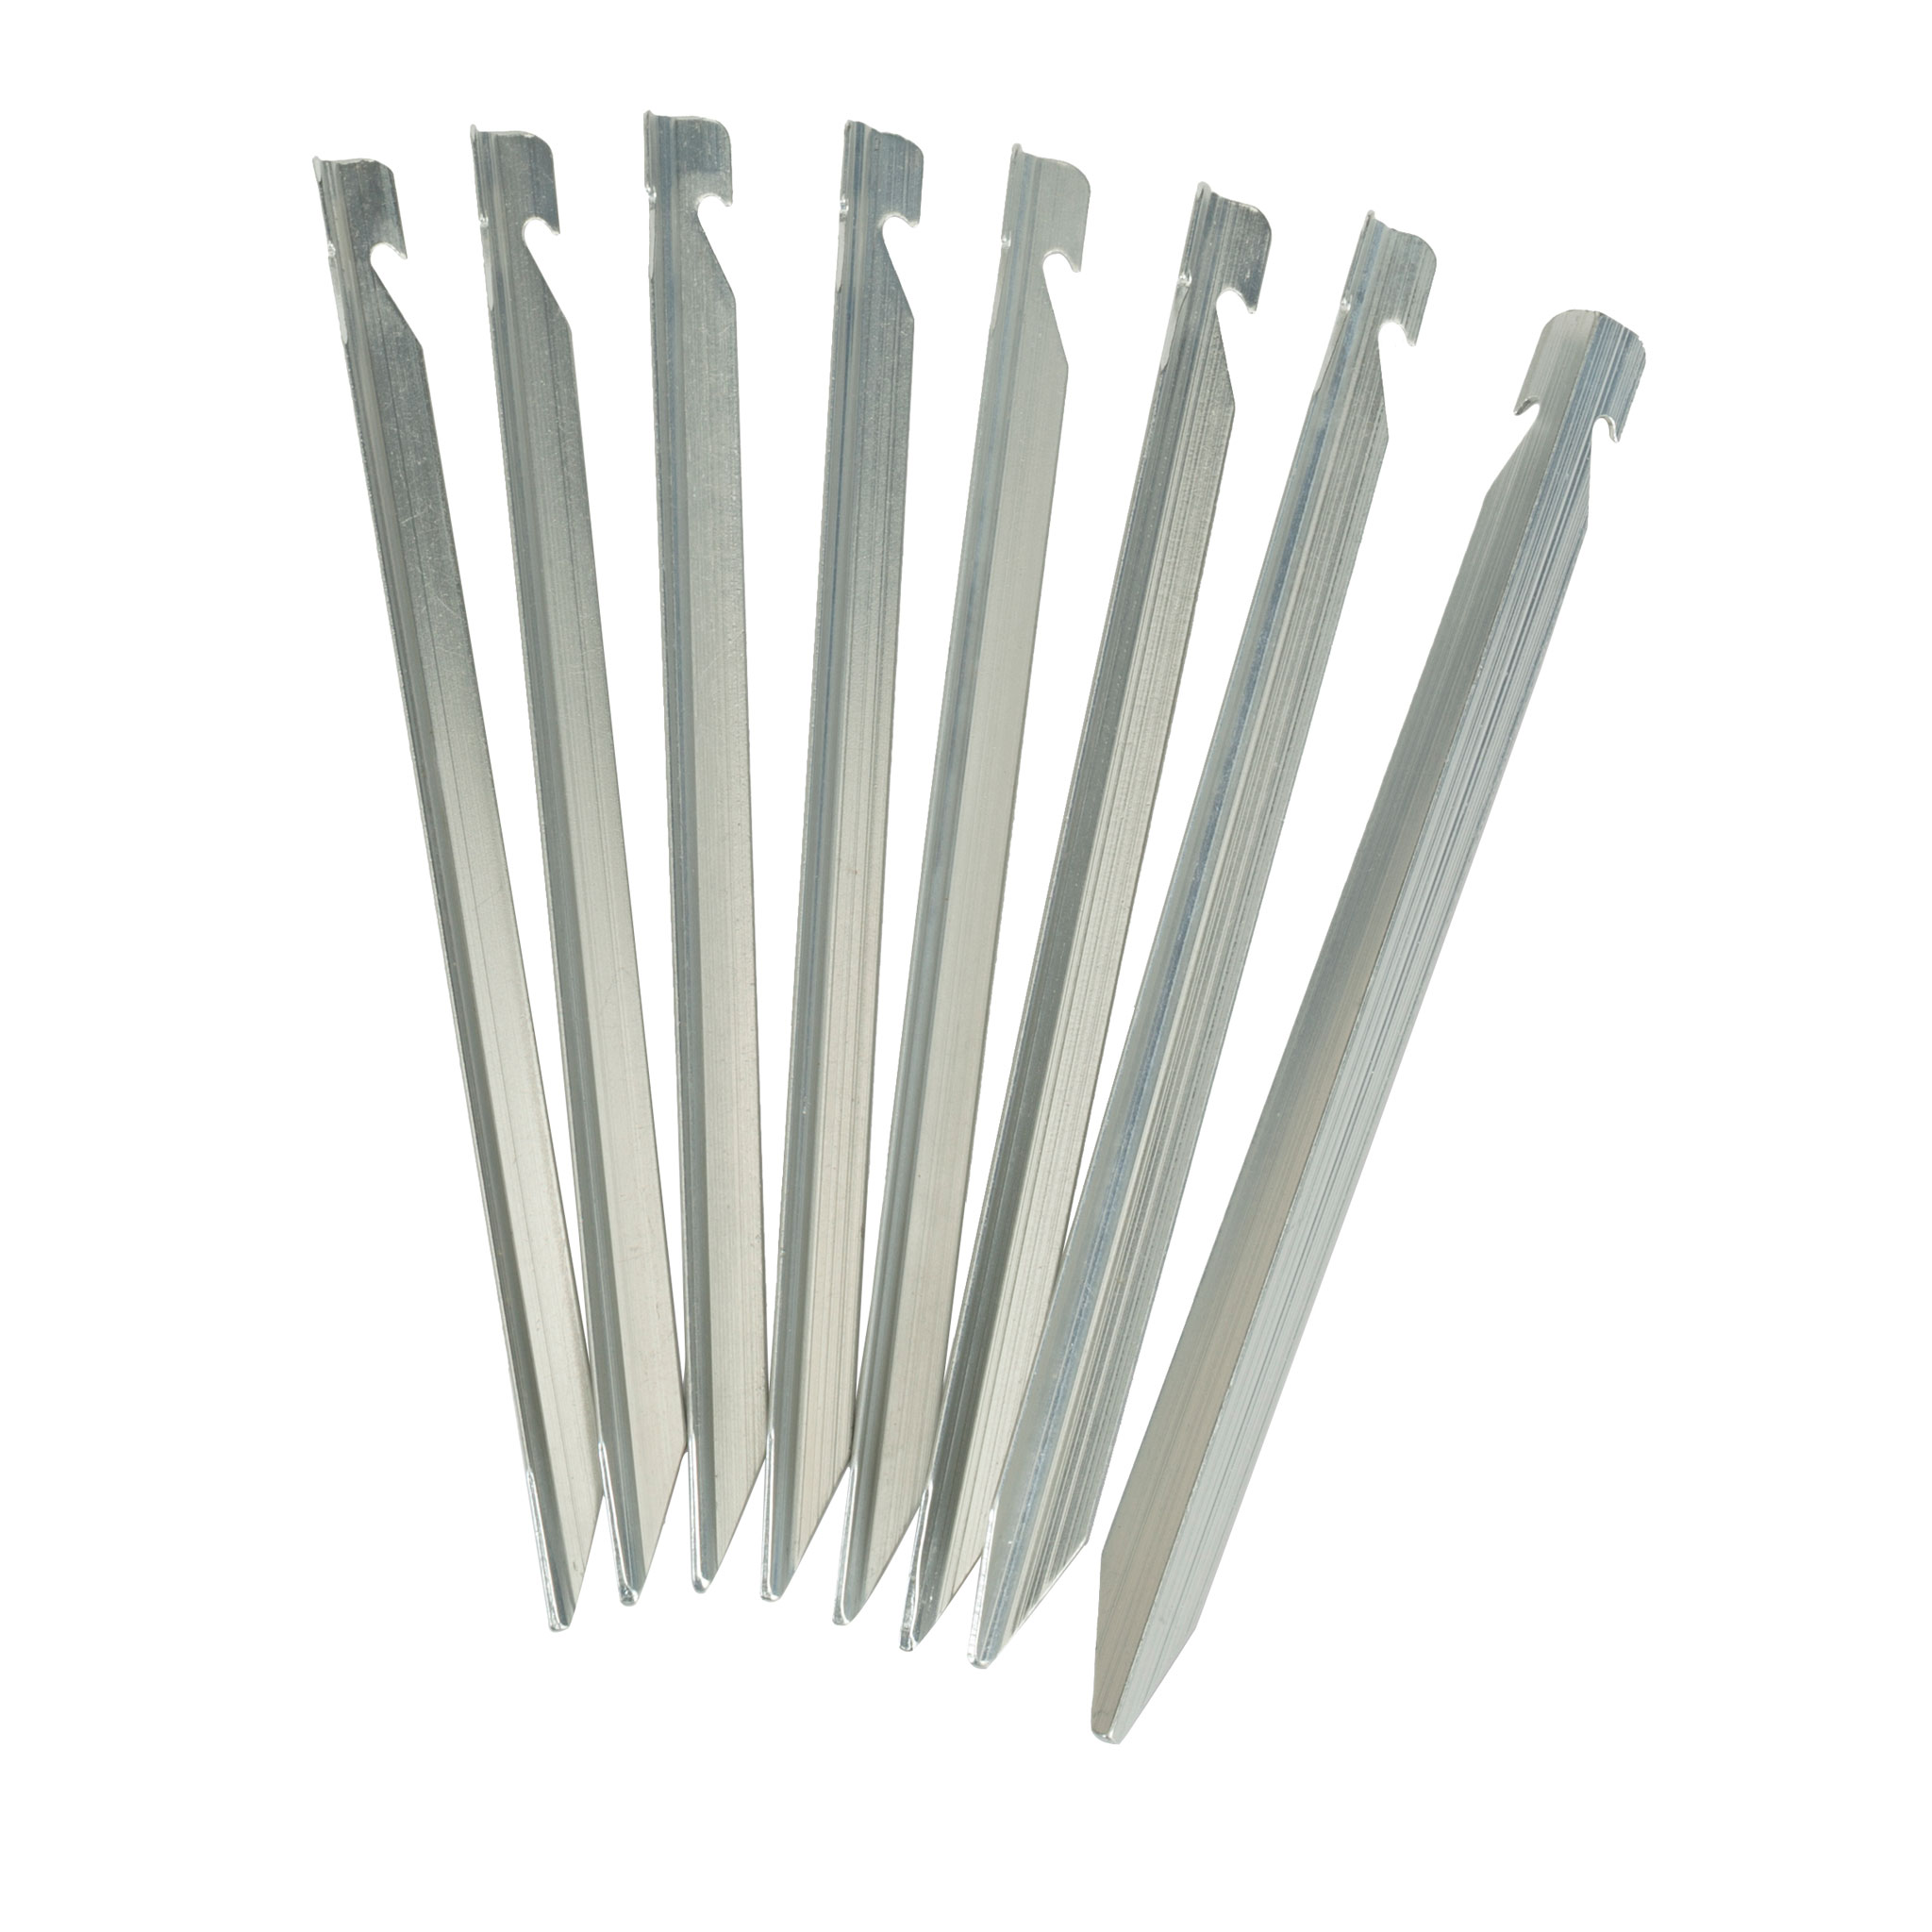 Mountainsmith Replacement Tent Stakes - 8 Count 